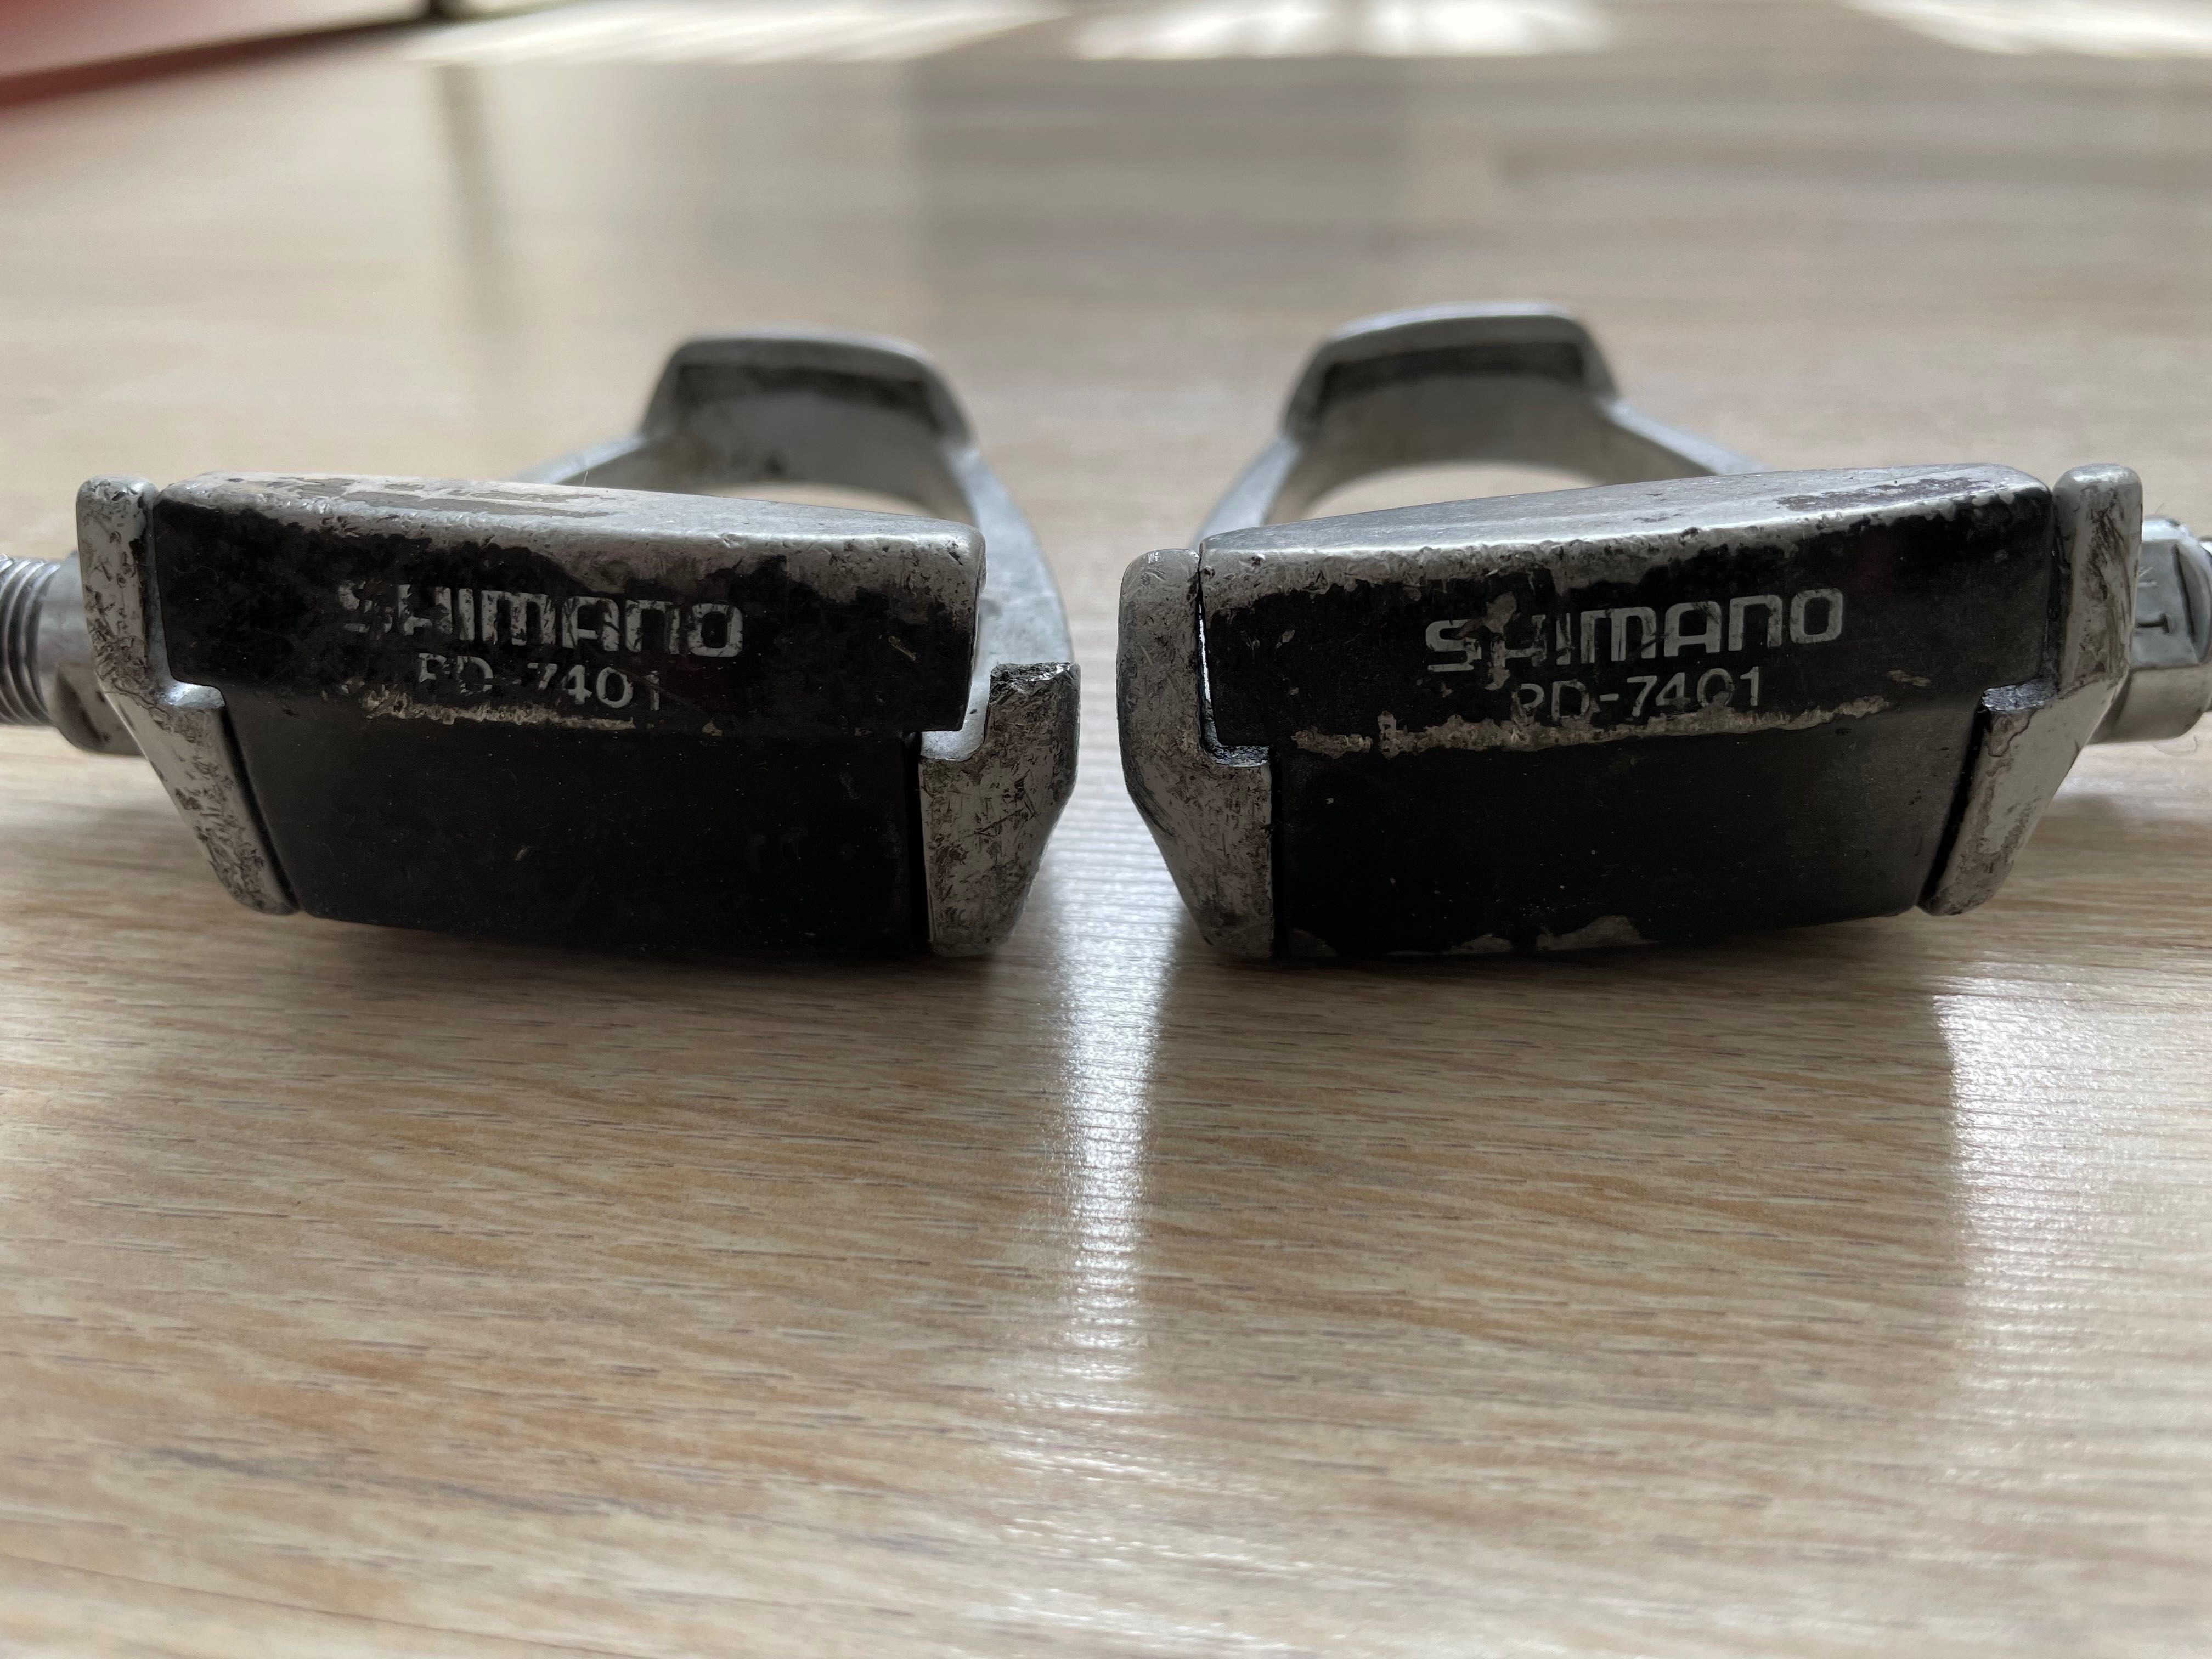 LOOK France for Shimano PD-7401 DURA-ACE Road